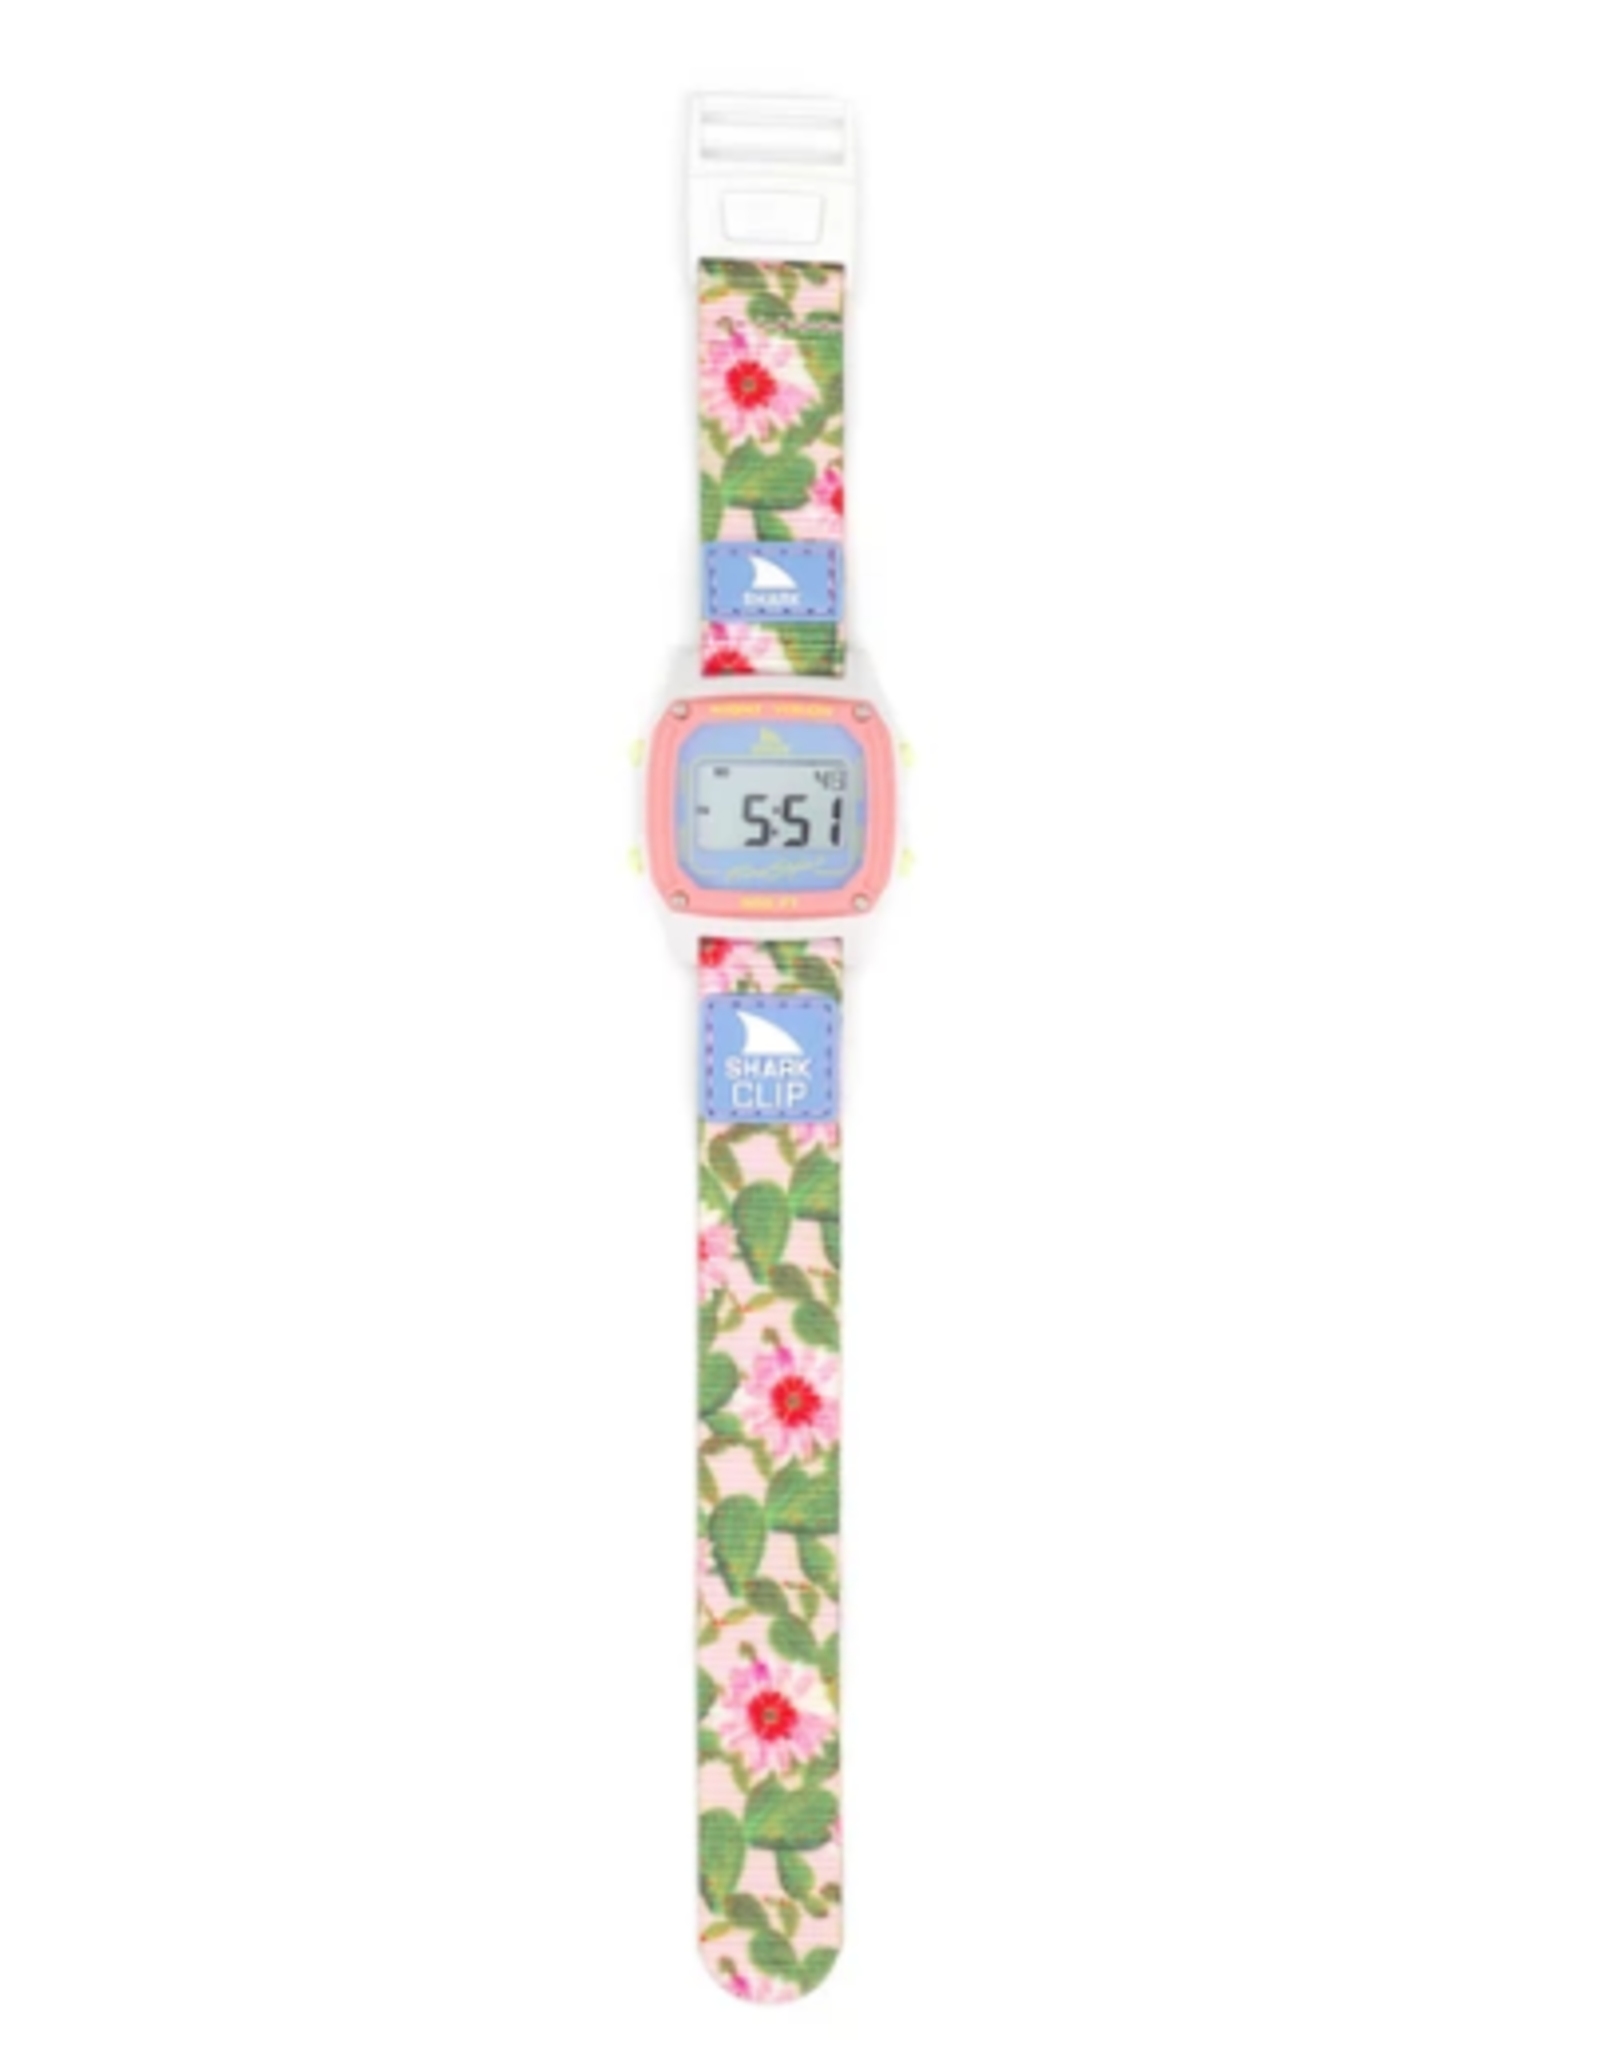 FREESTYLE FREESTYLE SHARK CLASSIC CLIP PRICKLY PEAR PINK WATCH